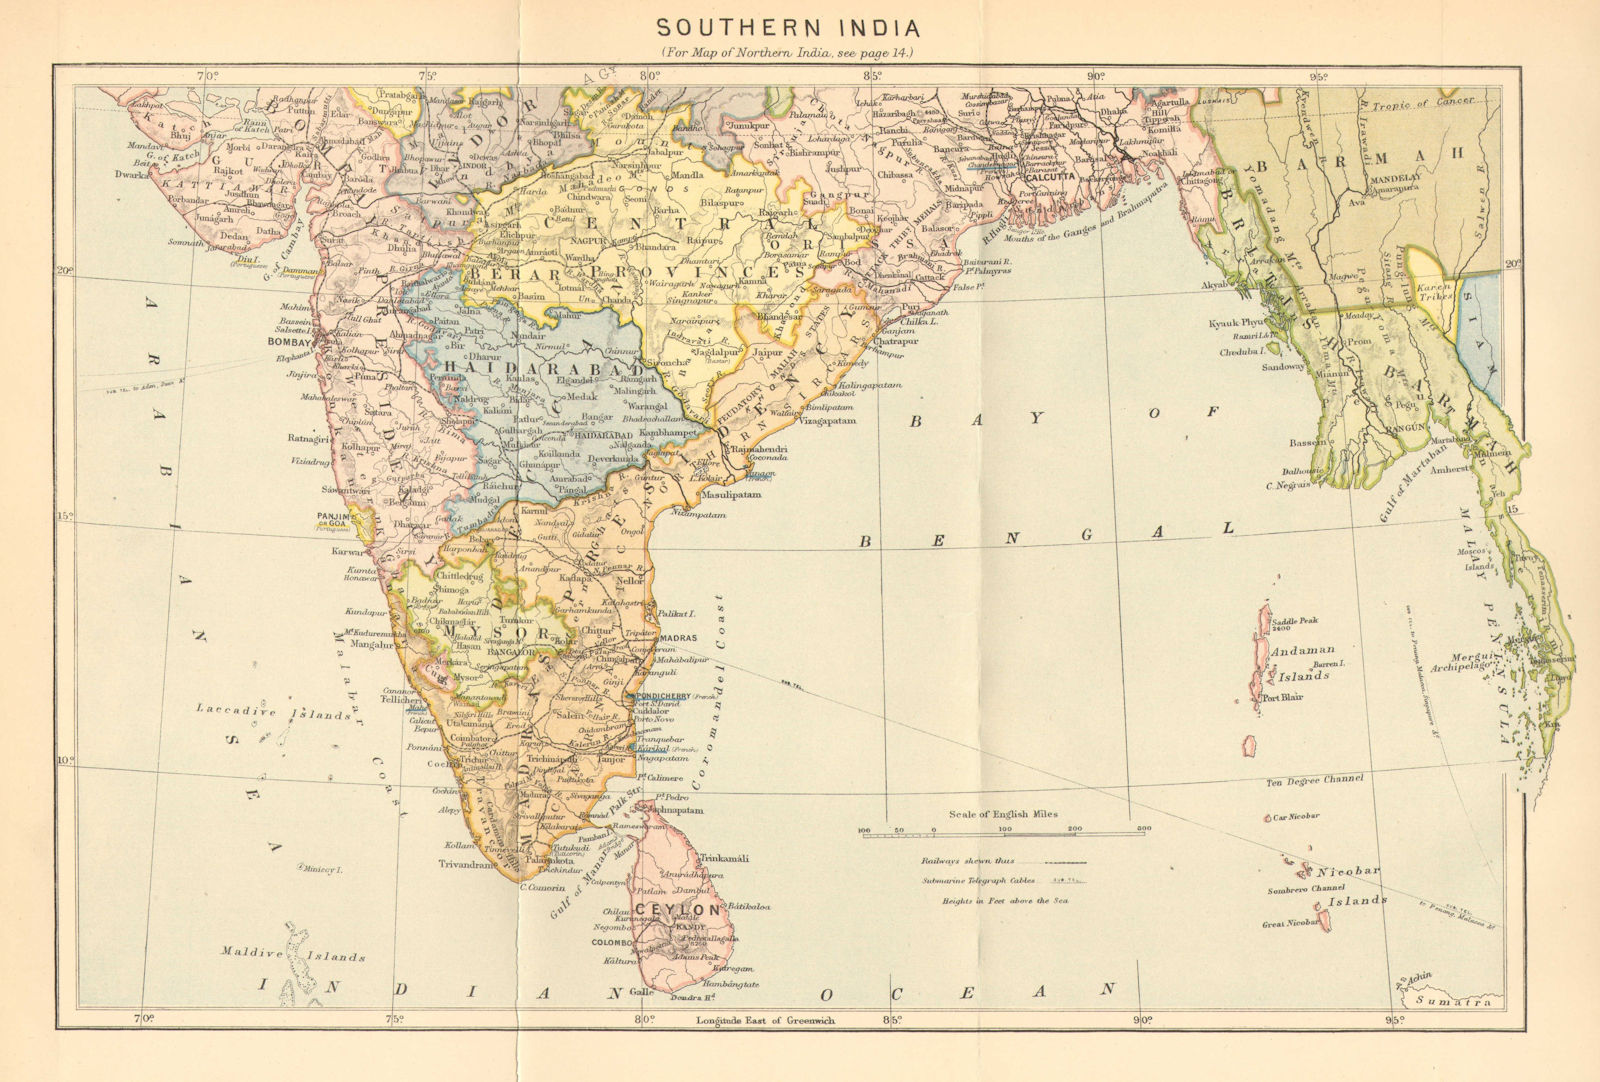 INDIA. South c1885 old antique vintage map plan chart